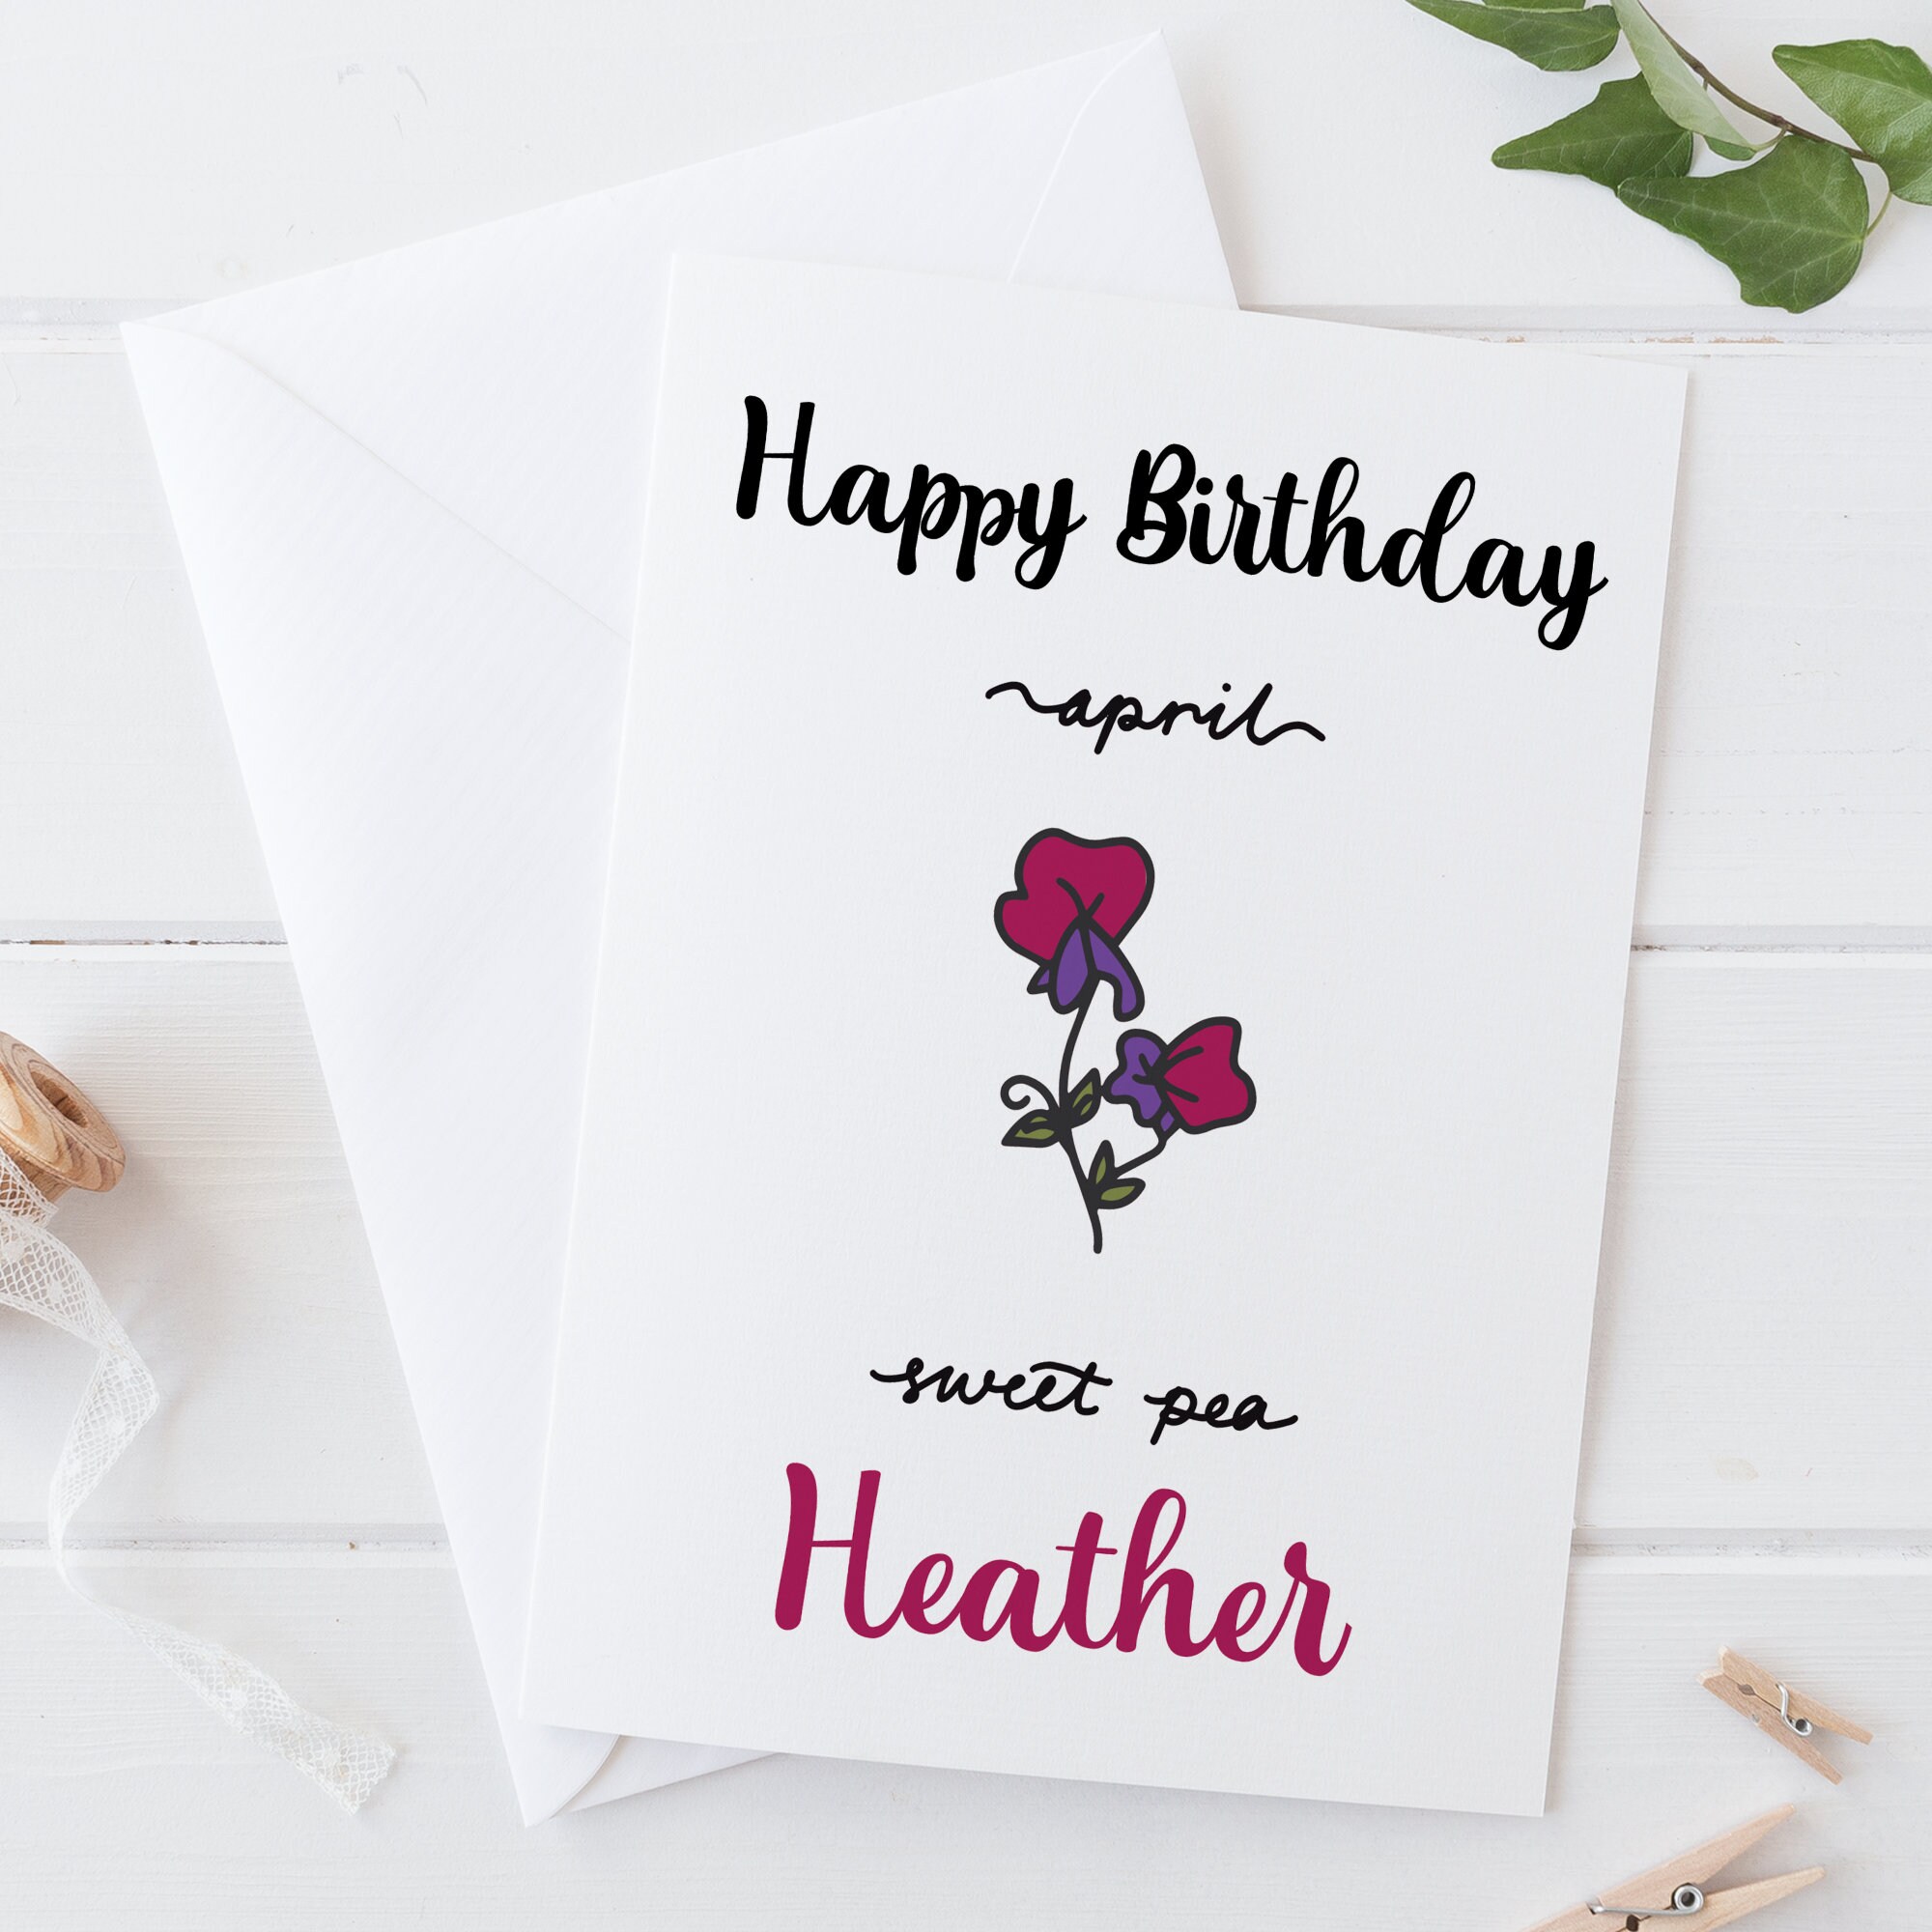 Heathers flowers & party supplies